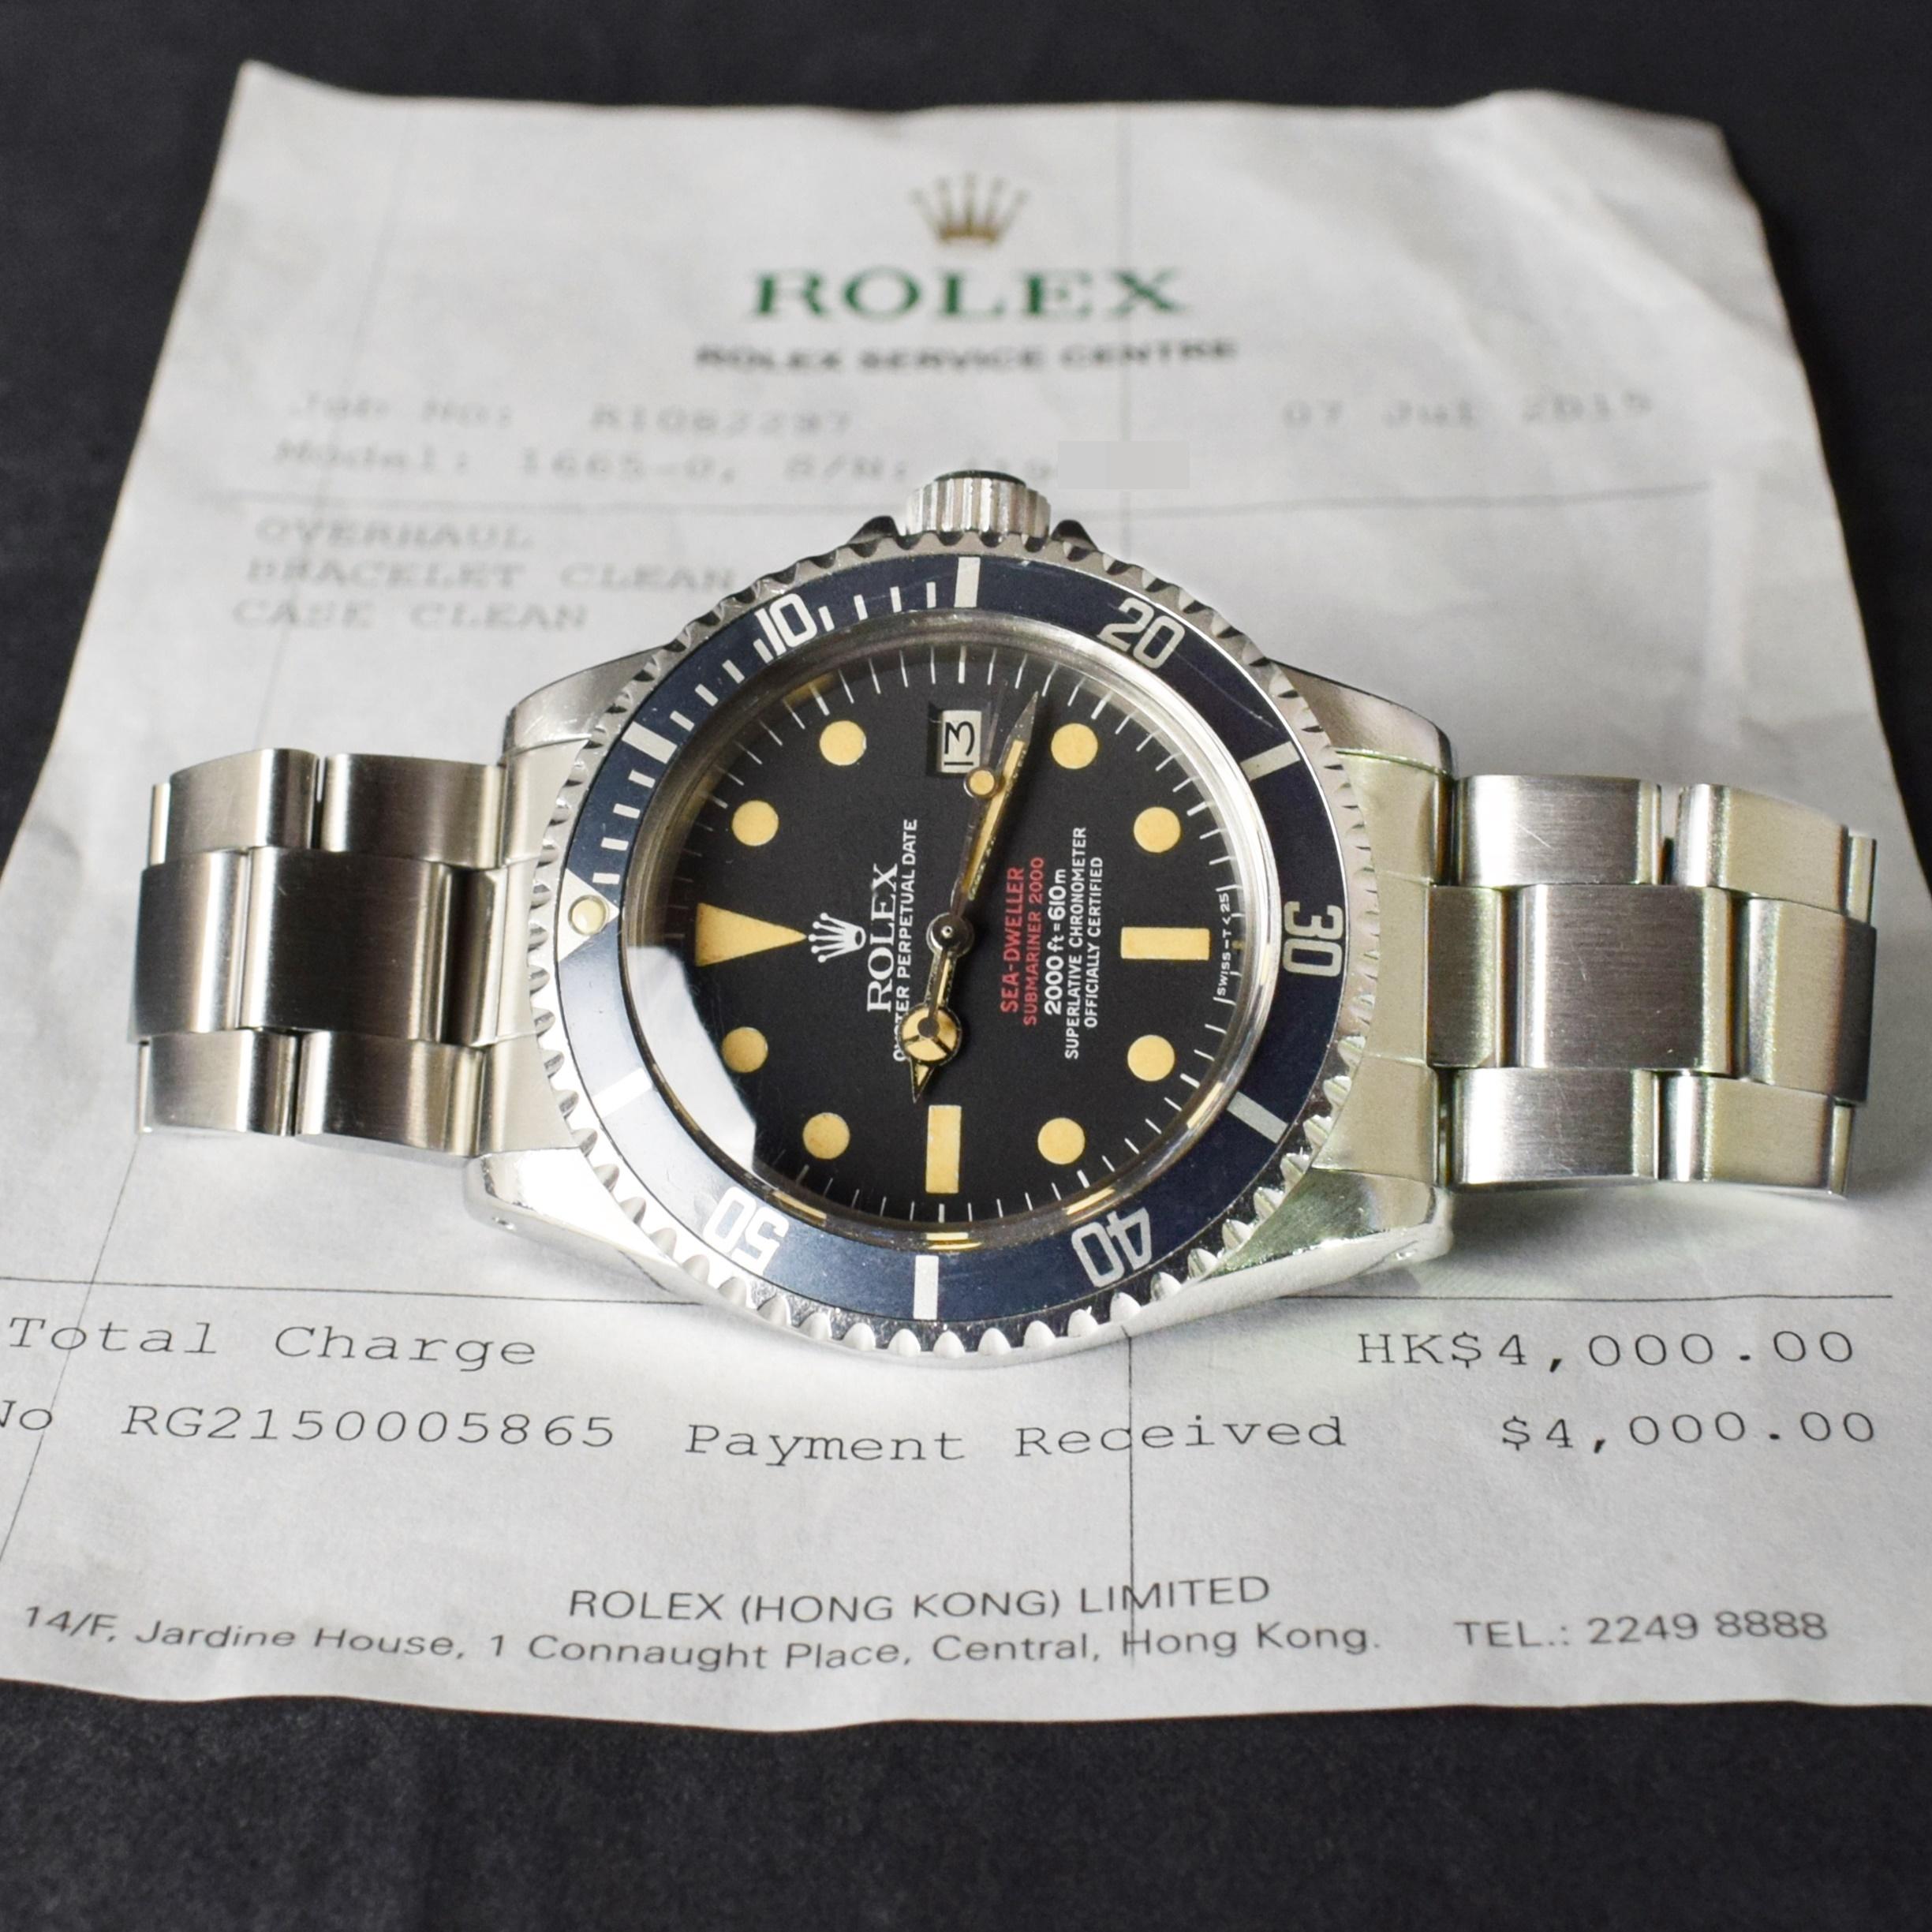 Brand: Vintage Rolex
Model: 1665
Year: 1974
Serial number: 41xxxxx
Reference: OT1472

Case: Show sign of wear super strong case with very slight polish from previous; inner case back stamped 1665 along with the full serials which matches with case